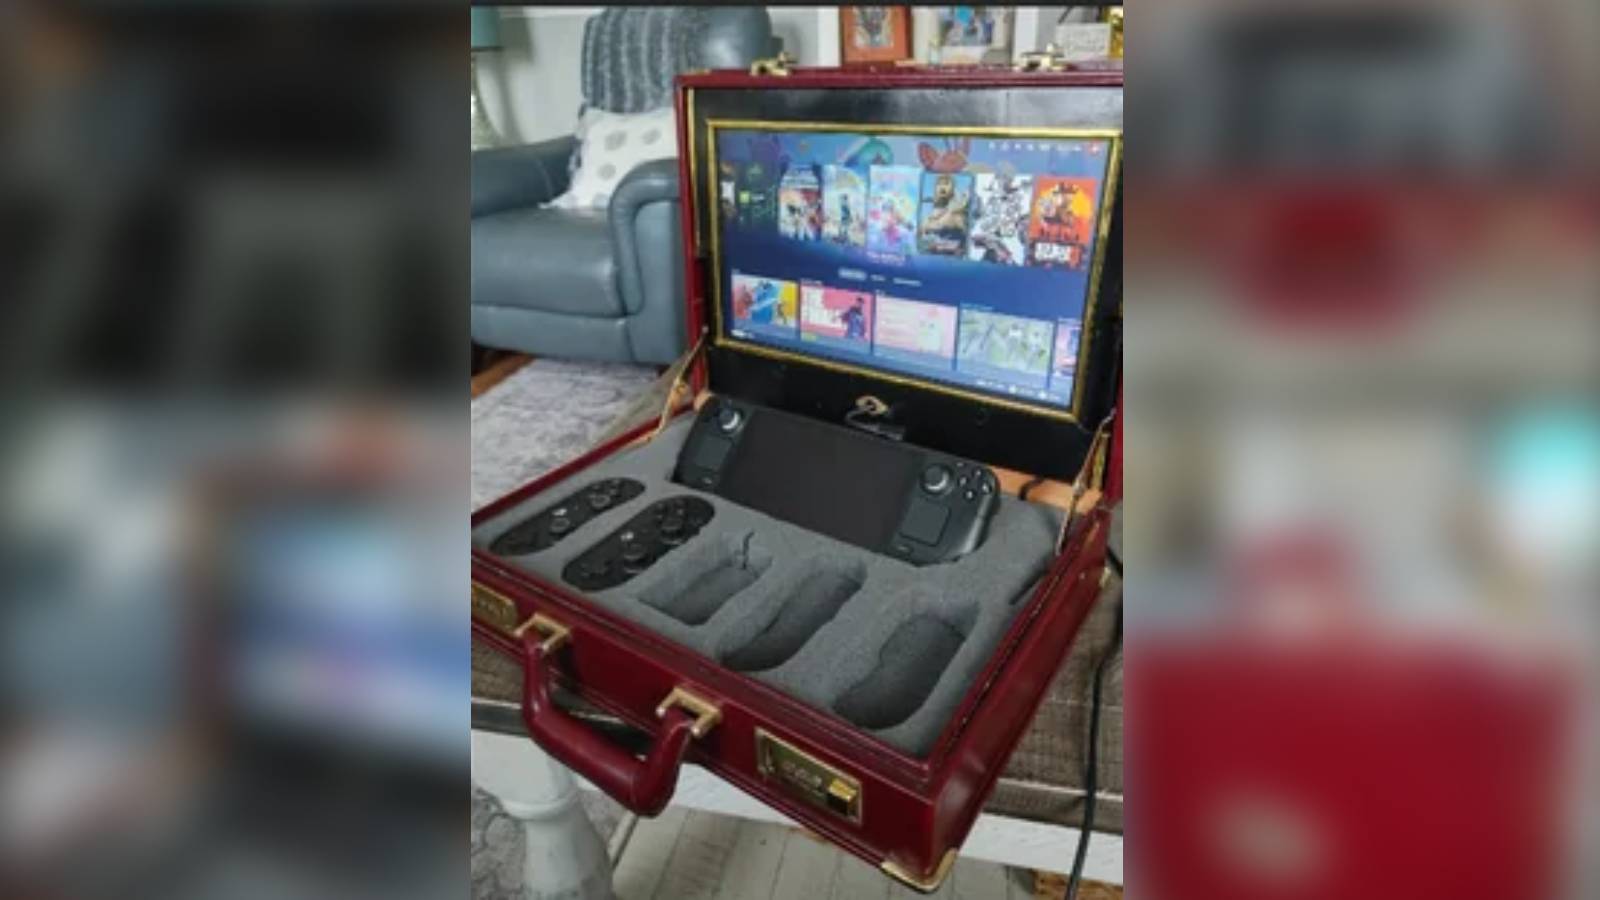 Image of a vintage modified Steam Deck briefcase taken from Yodarules2's Reddit post.